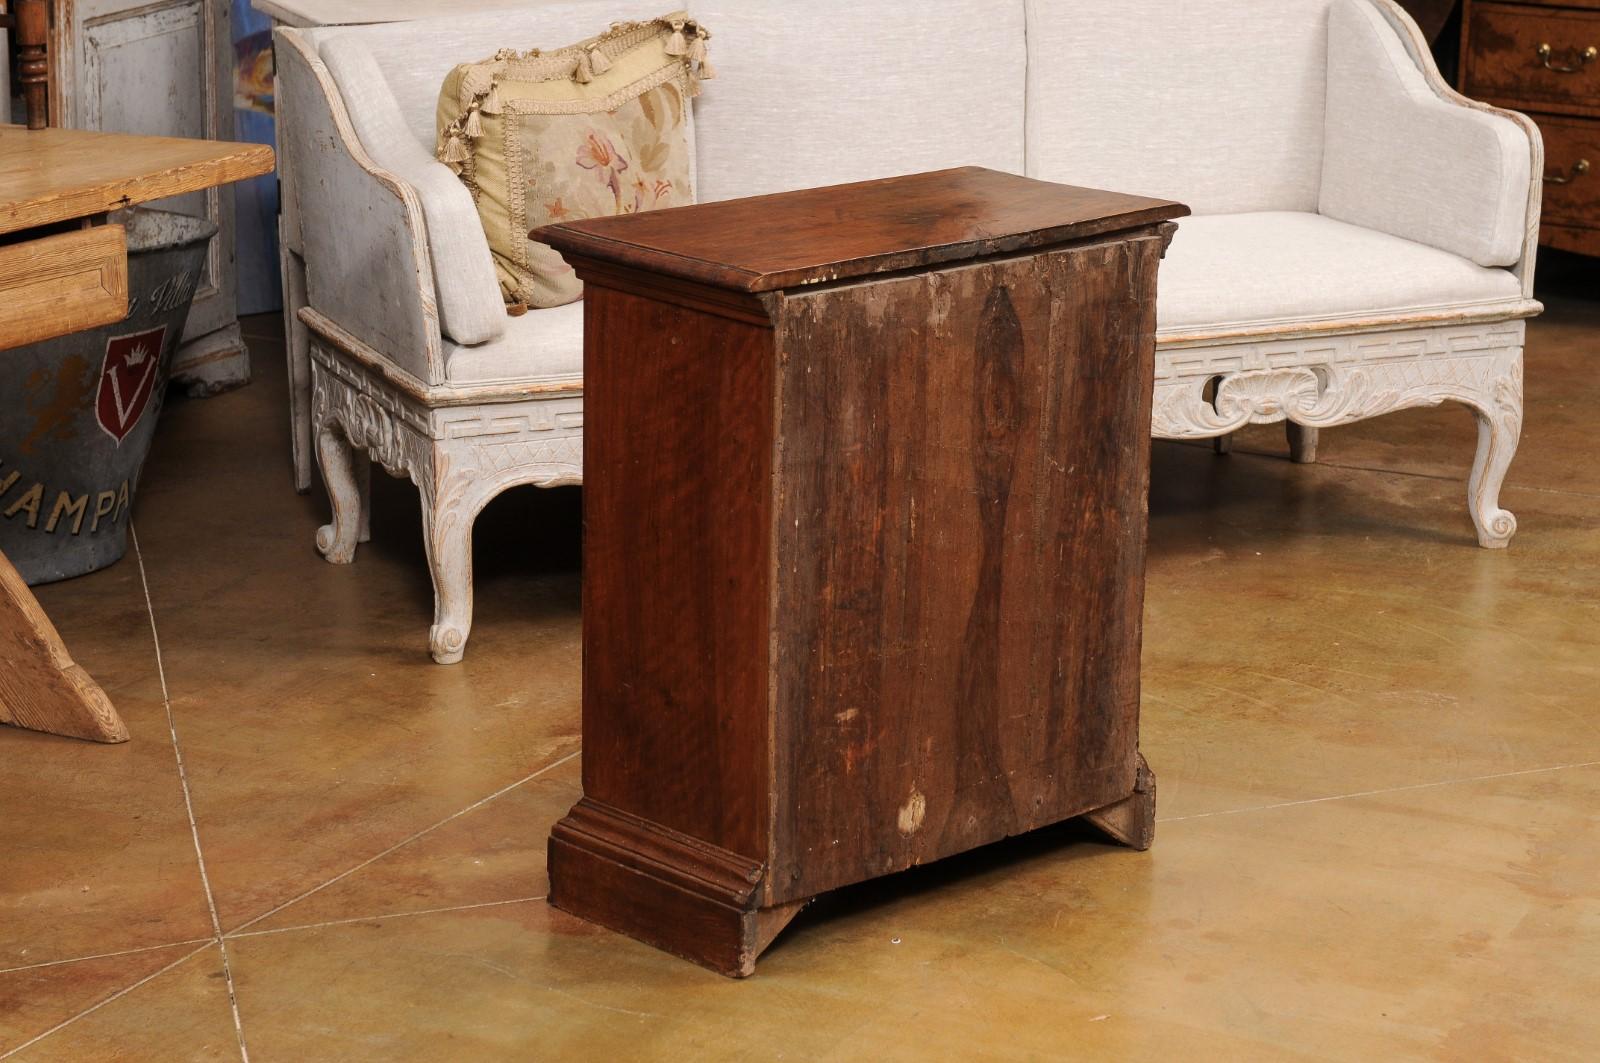 Italian 1840s Bedside Chest with Four Drawers, Burl Panels and Bracket Feet For Sale 2